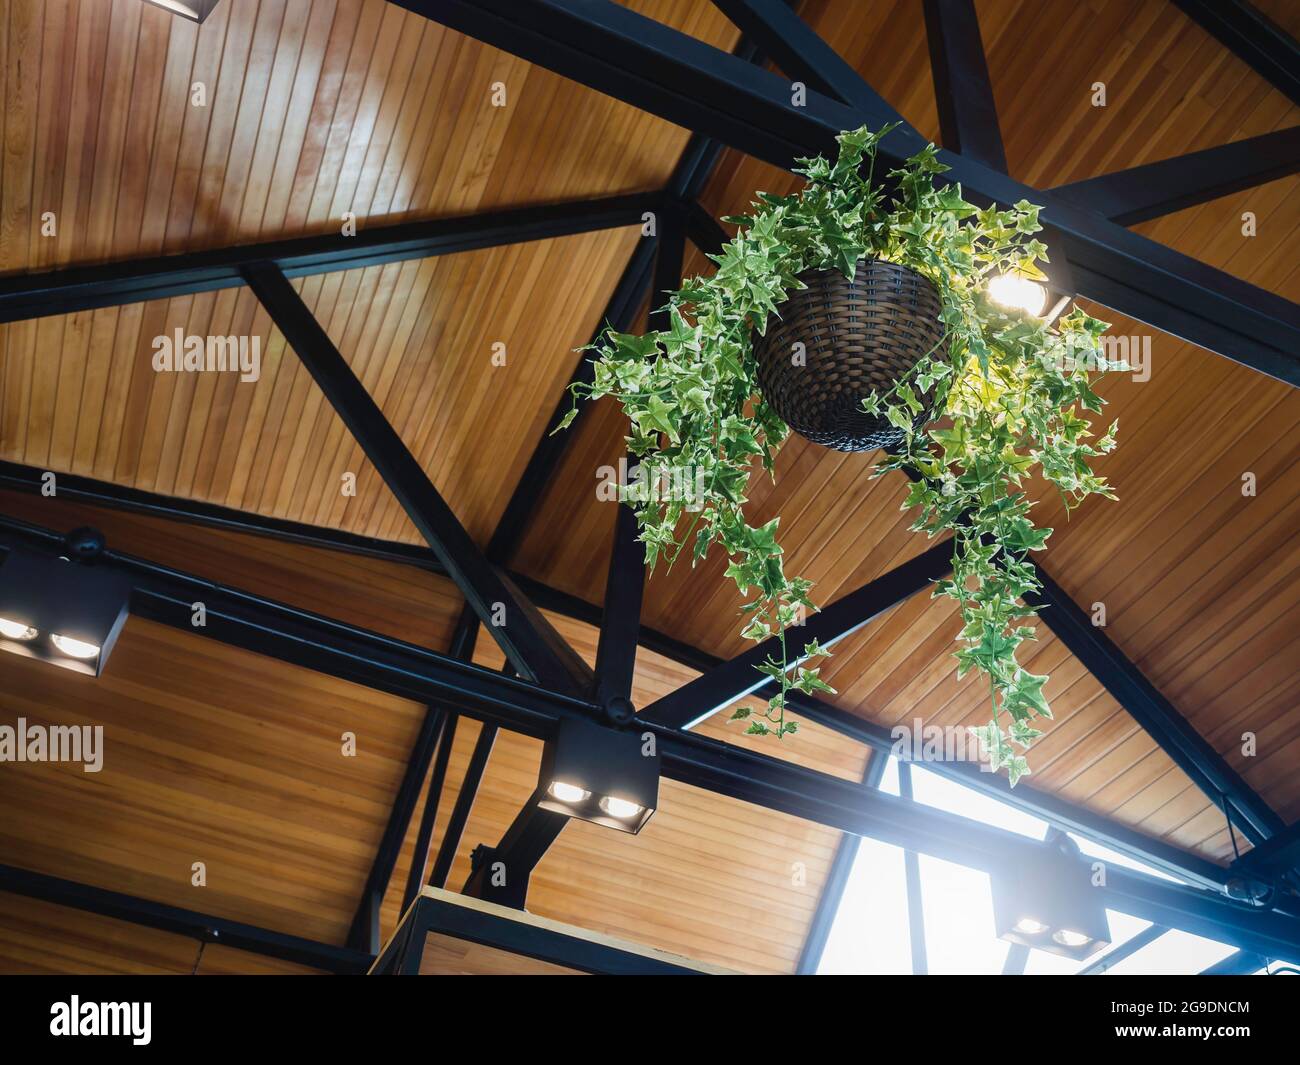 Hanging plant basket with green leaves on the black iron construction under the wooden roof decoration with ceiling lamp inside the modern building. Stock Photo